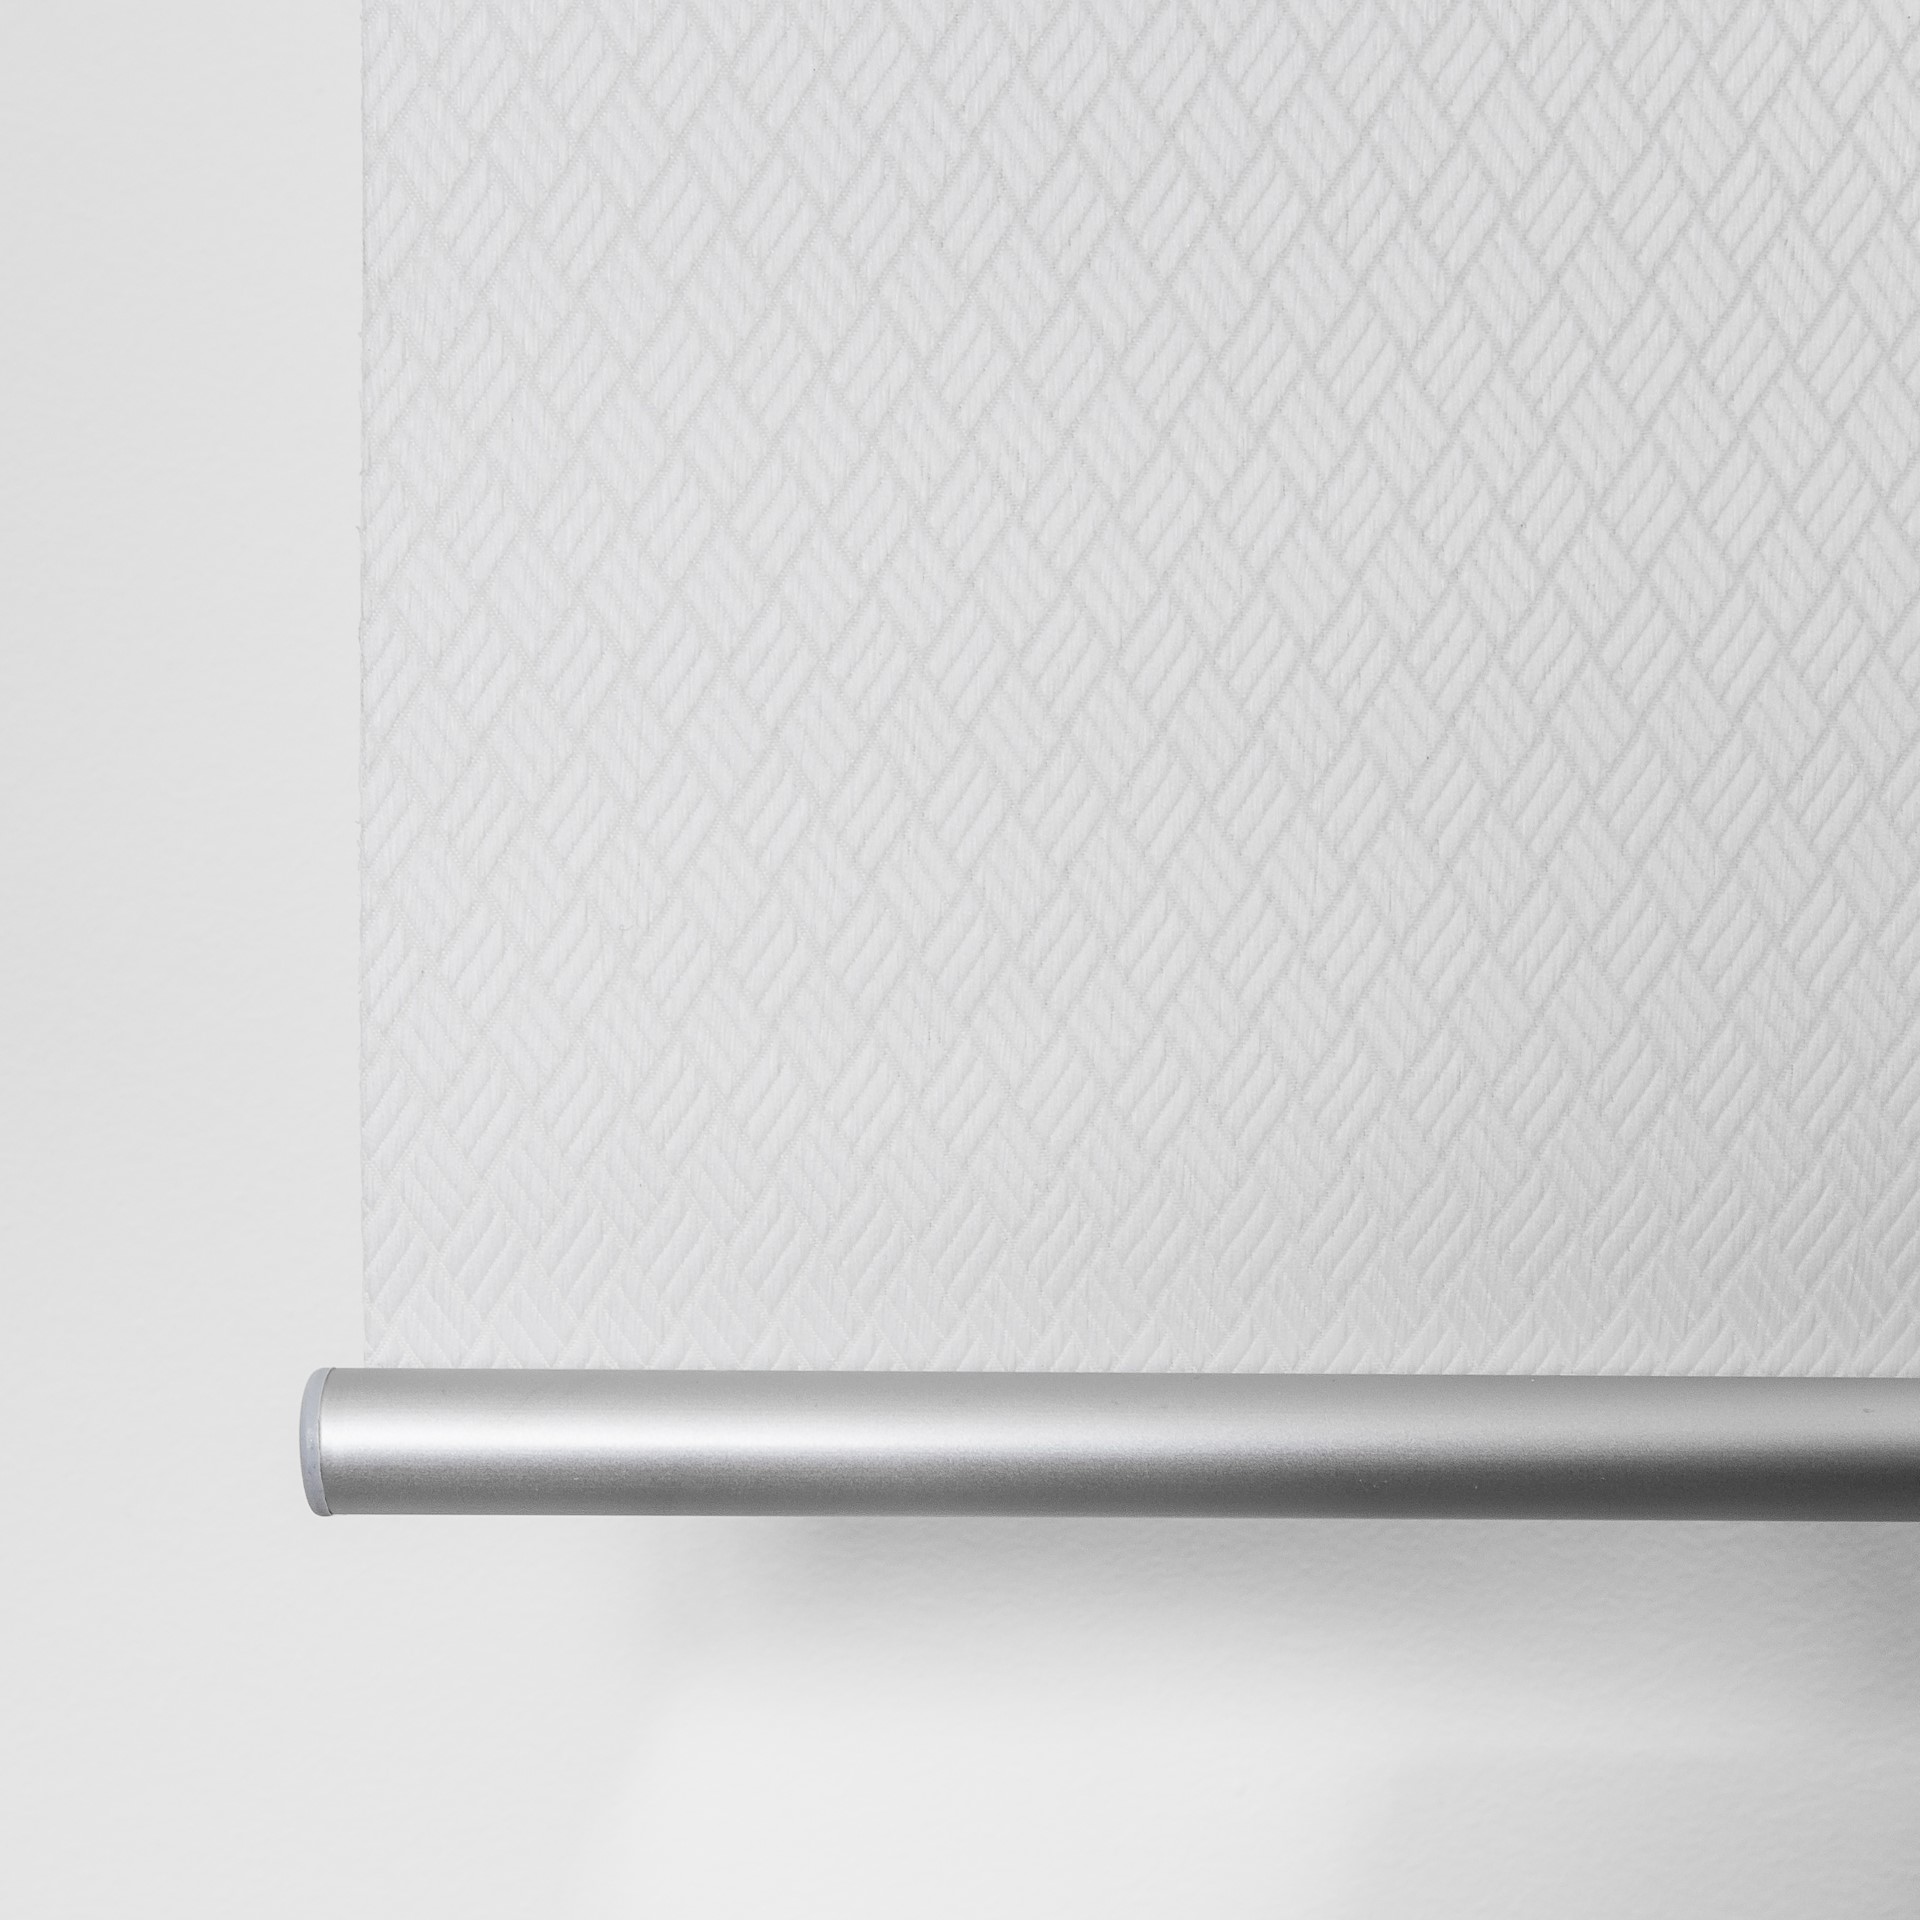 Ribbed Translucent Roller Blind White Counterweight Detail